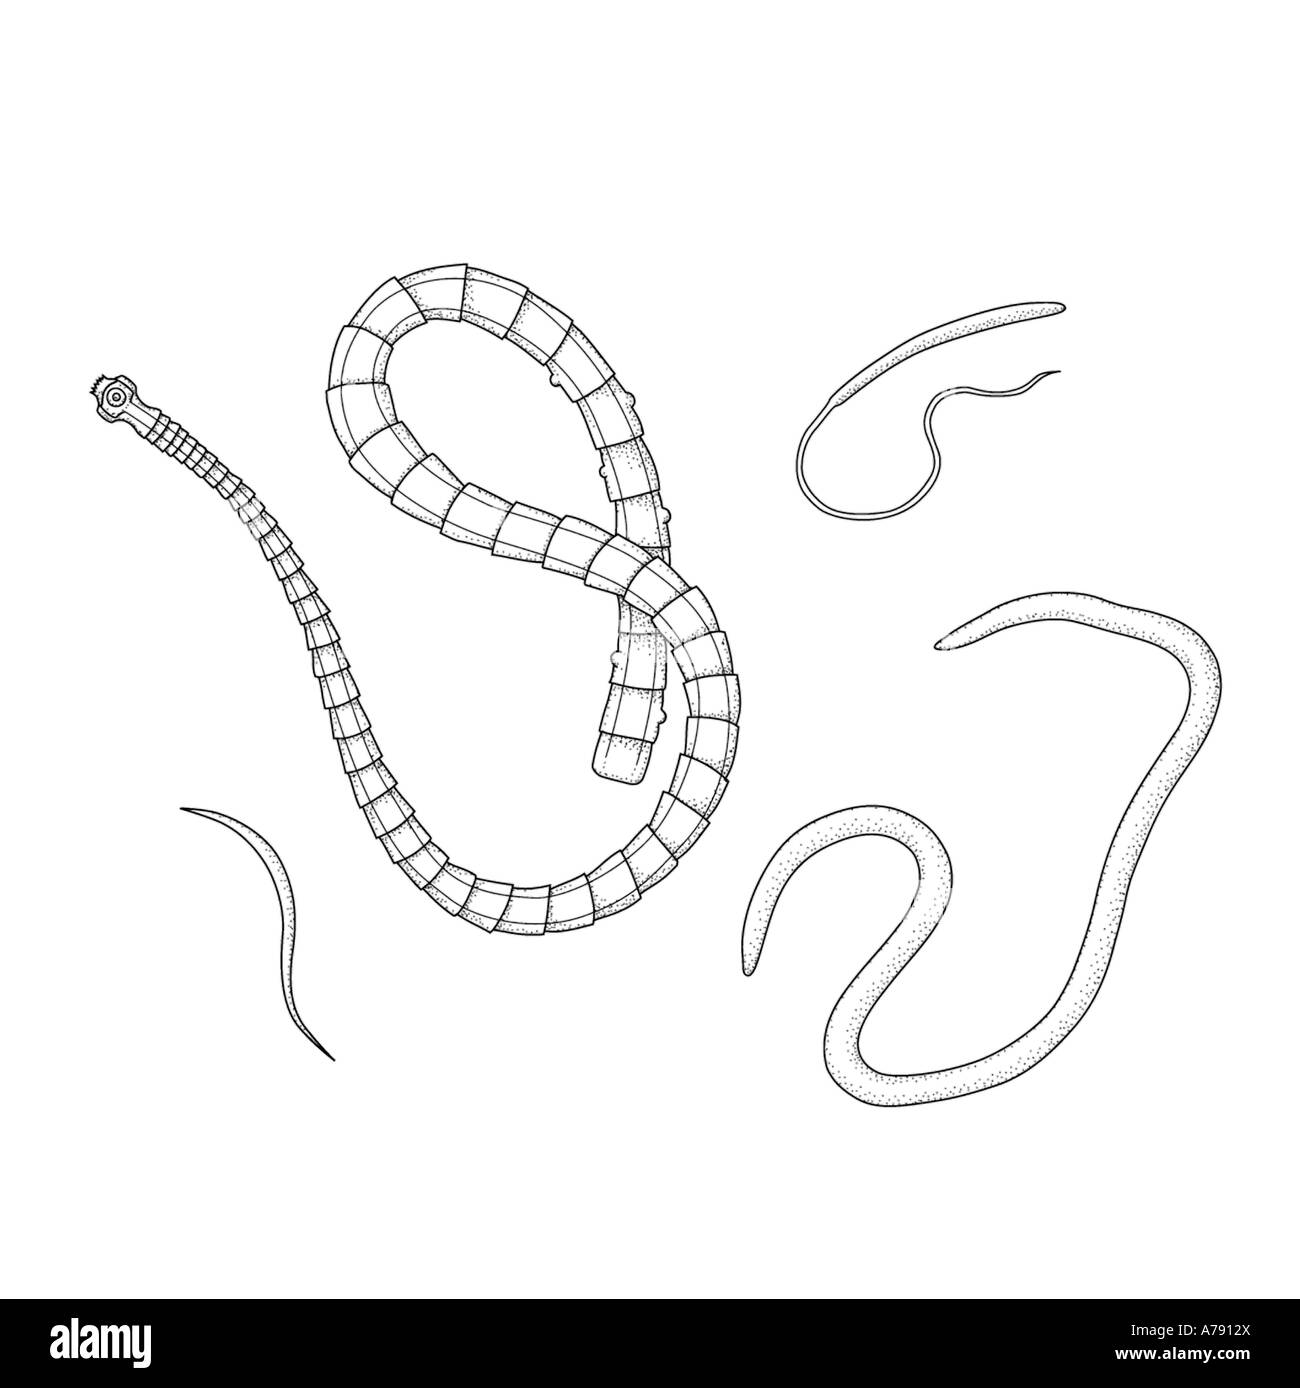 An illustration showing various types of parasitic worms. Stock Photo